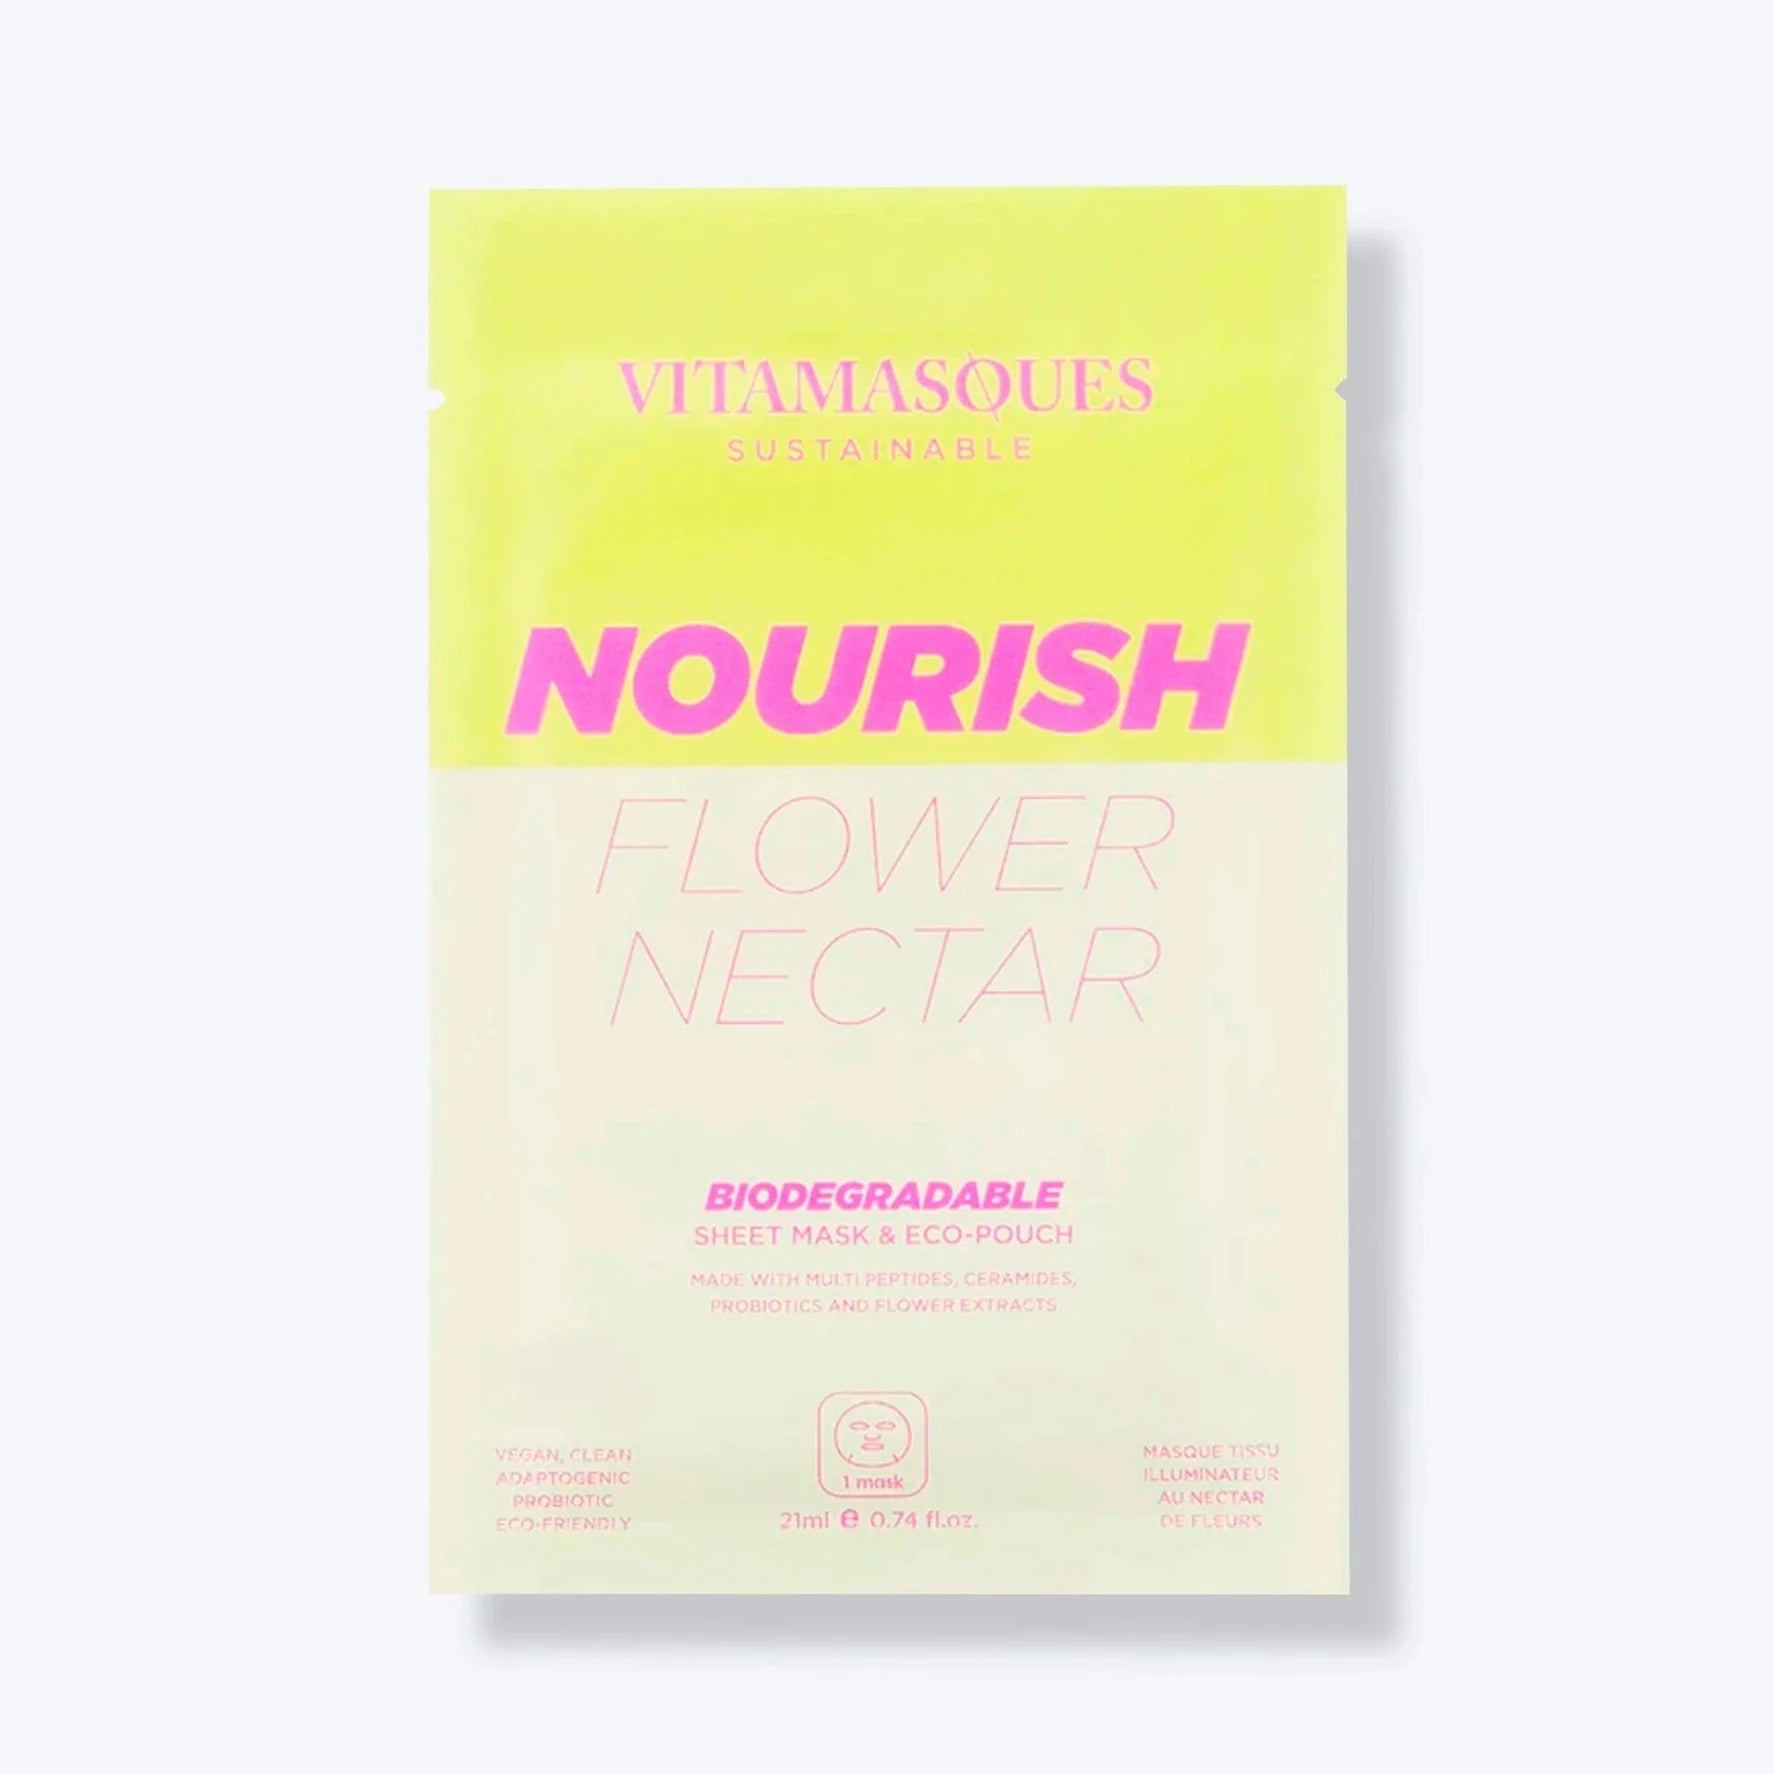 two toned yellow packaging with pink text for the nourish flower nectar biodegradable sheet mask